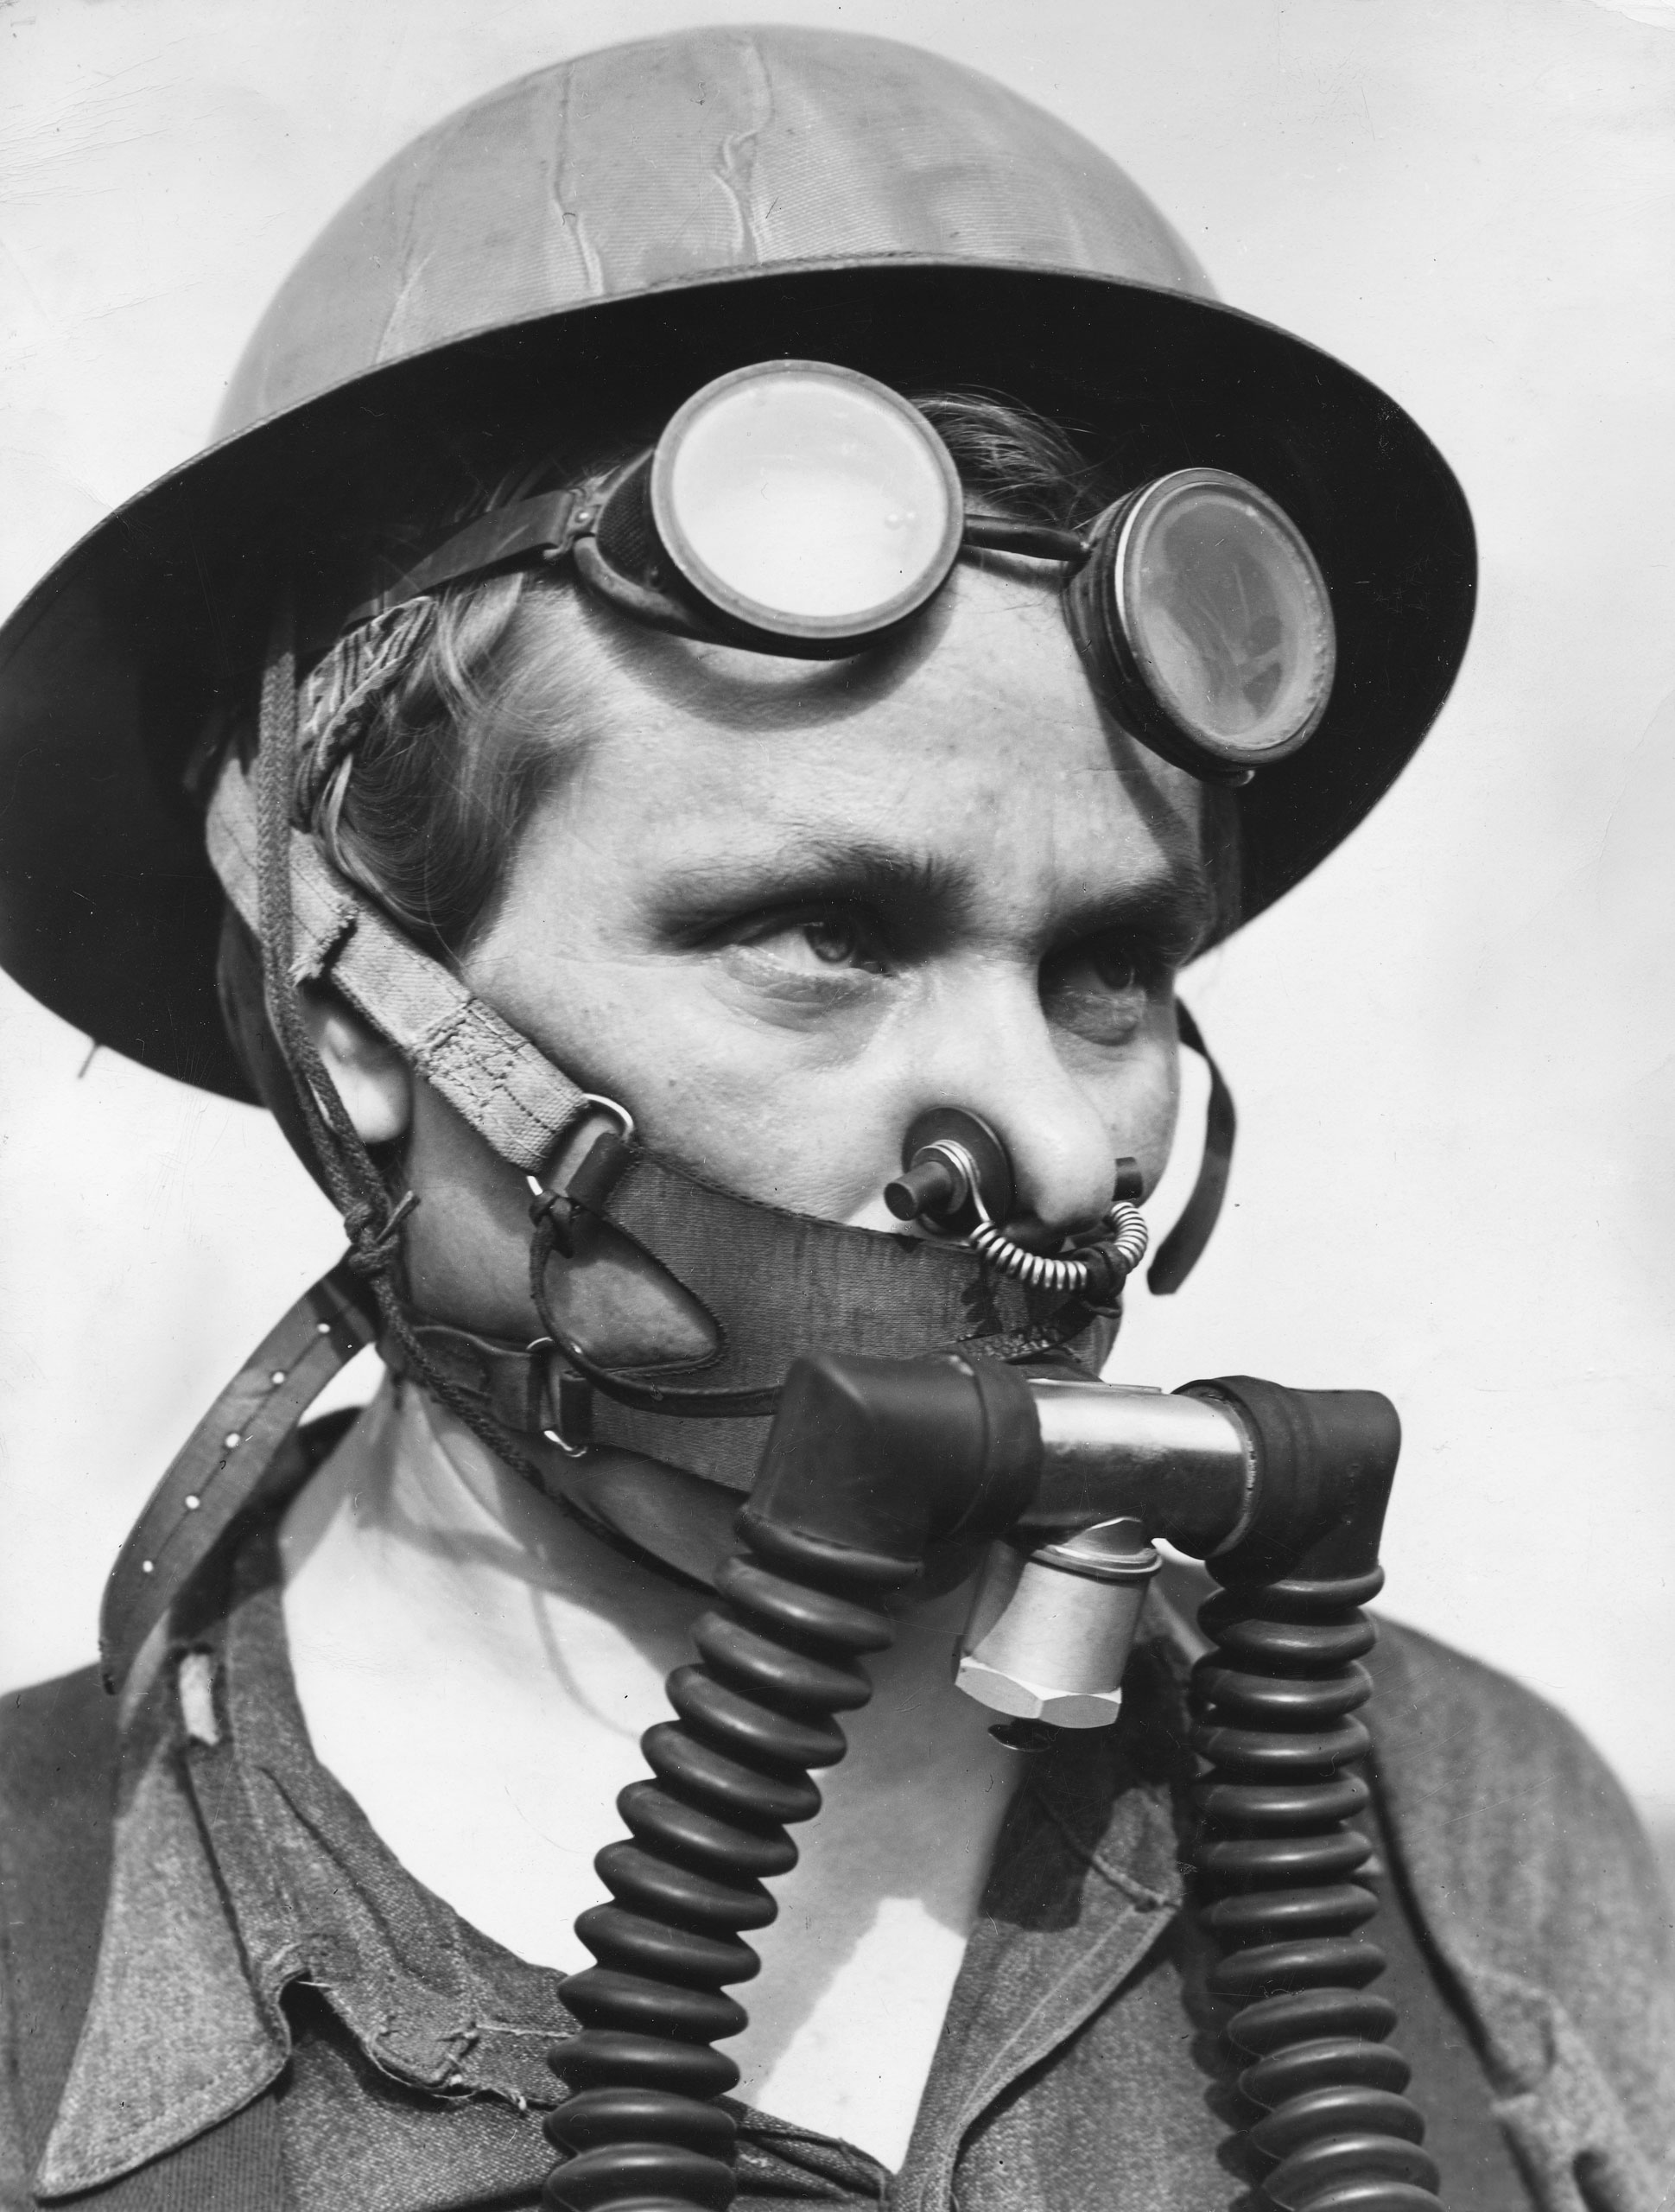 Bernice Daunora, 31, a member of a steel mill's "top gang" who must wear a "one-hour, lightweight breathing apparatus" as protection against gas escaping from blast furnaces, Gary, Ind., 1943.